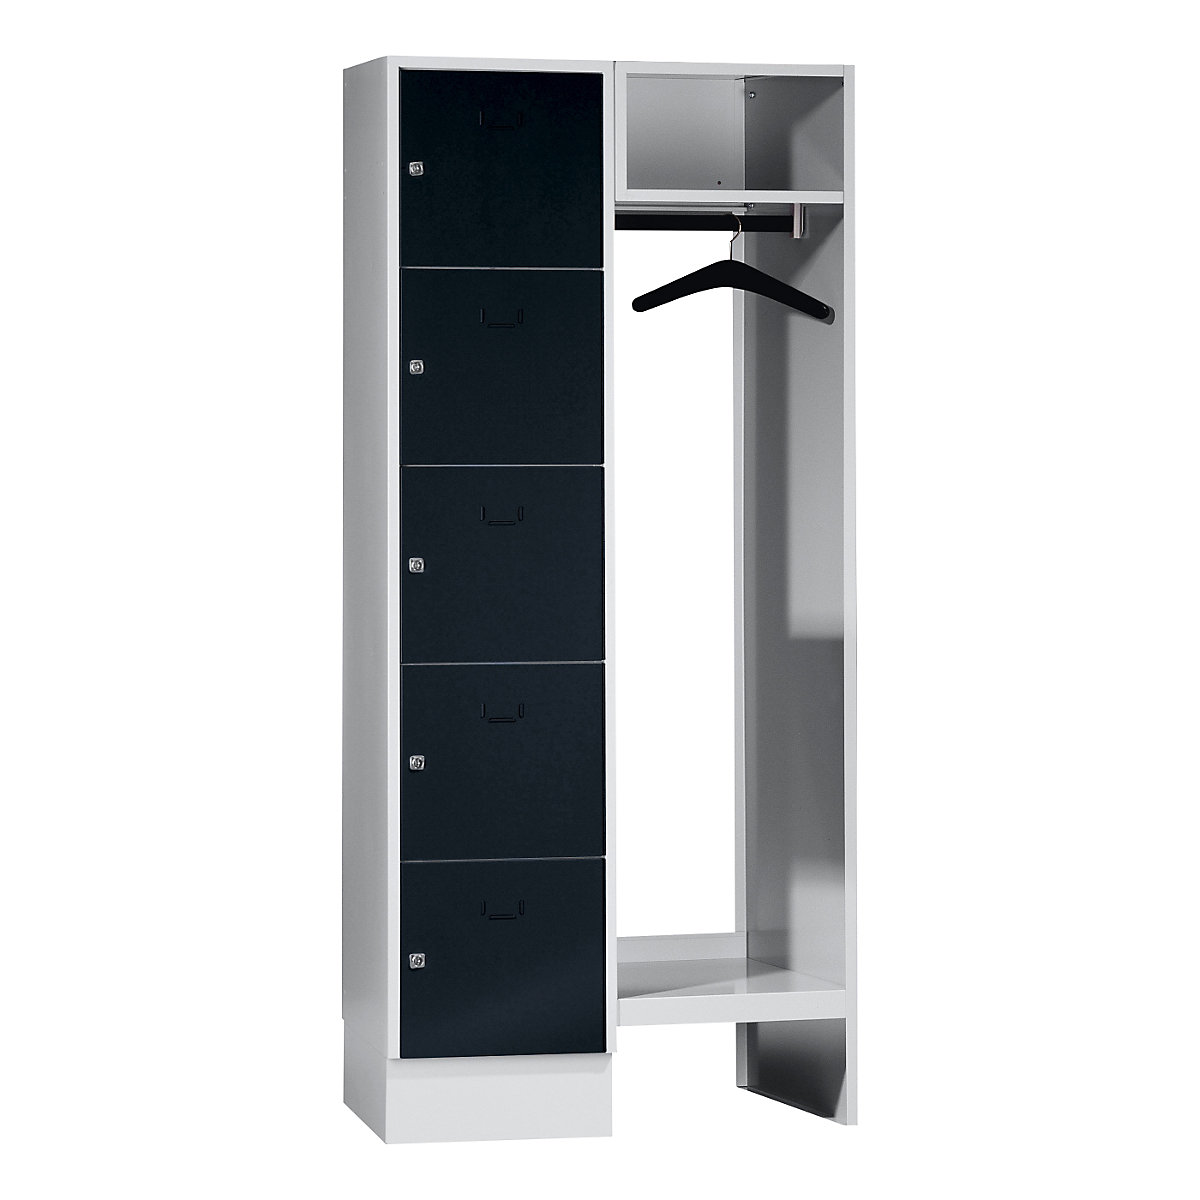 Cloakroom locker system – Wolf, 5 compartments on left, 5 coat hangers, overall width 850 mm, compartment width 398 mm, jet black / light grey-13